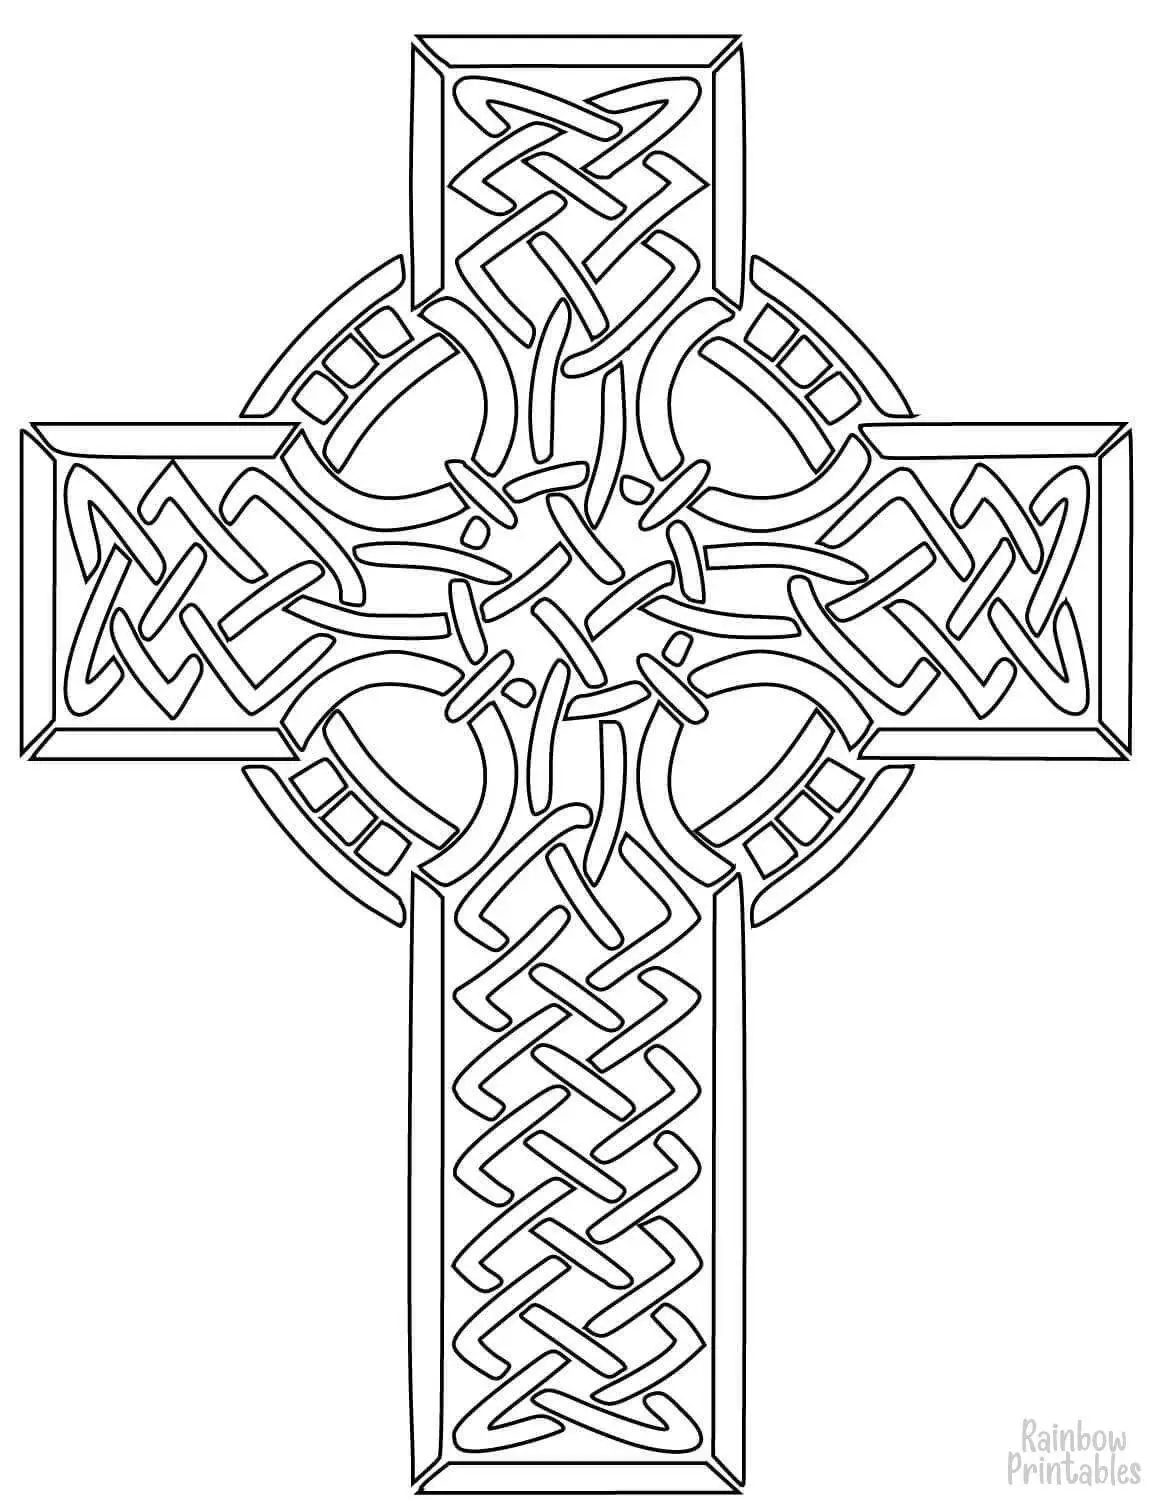 SIMPLE-EASY-line-drawings-celtic-cross-coloring-page-for-kids